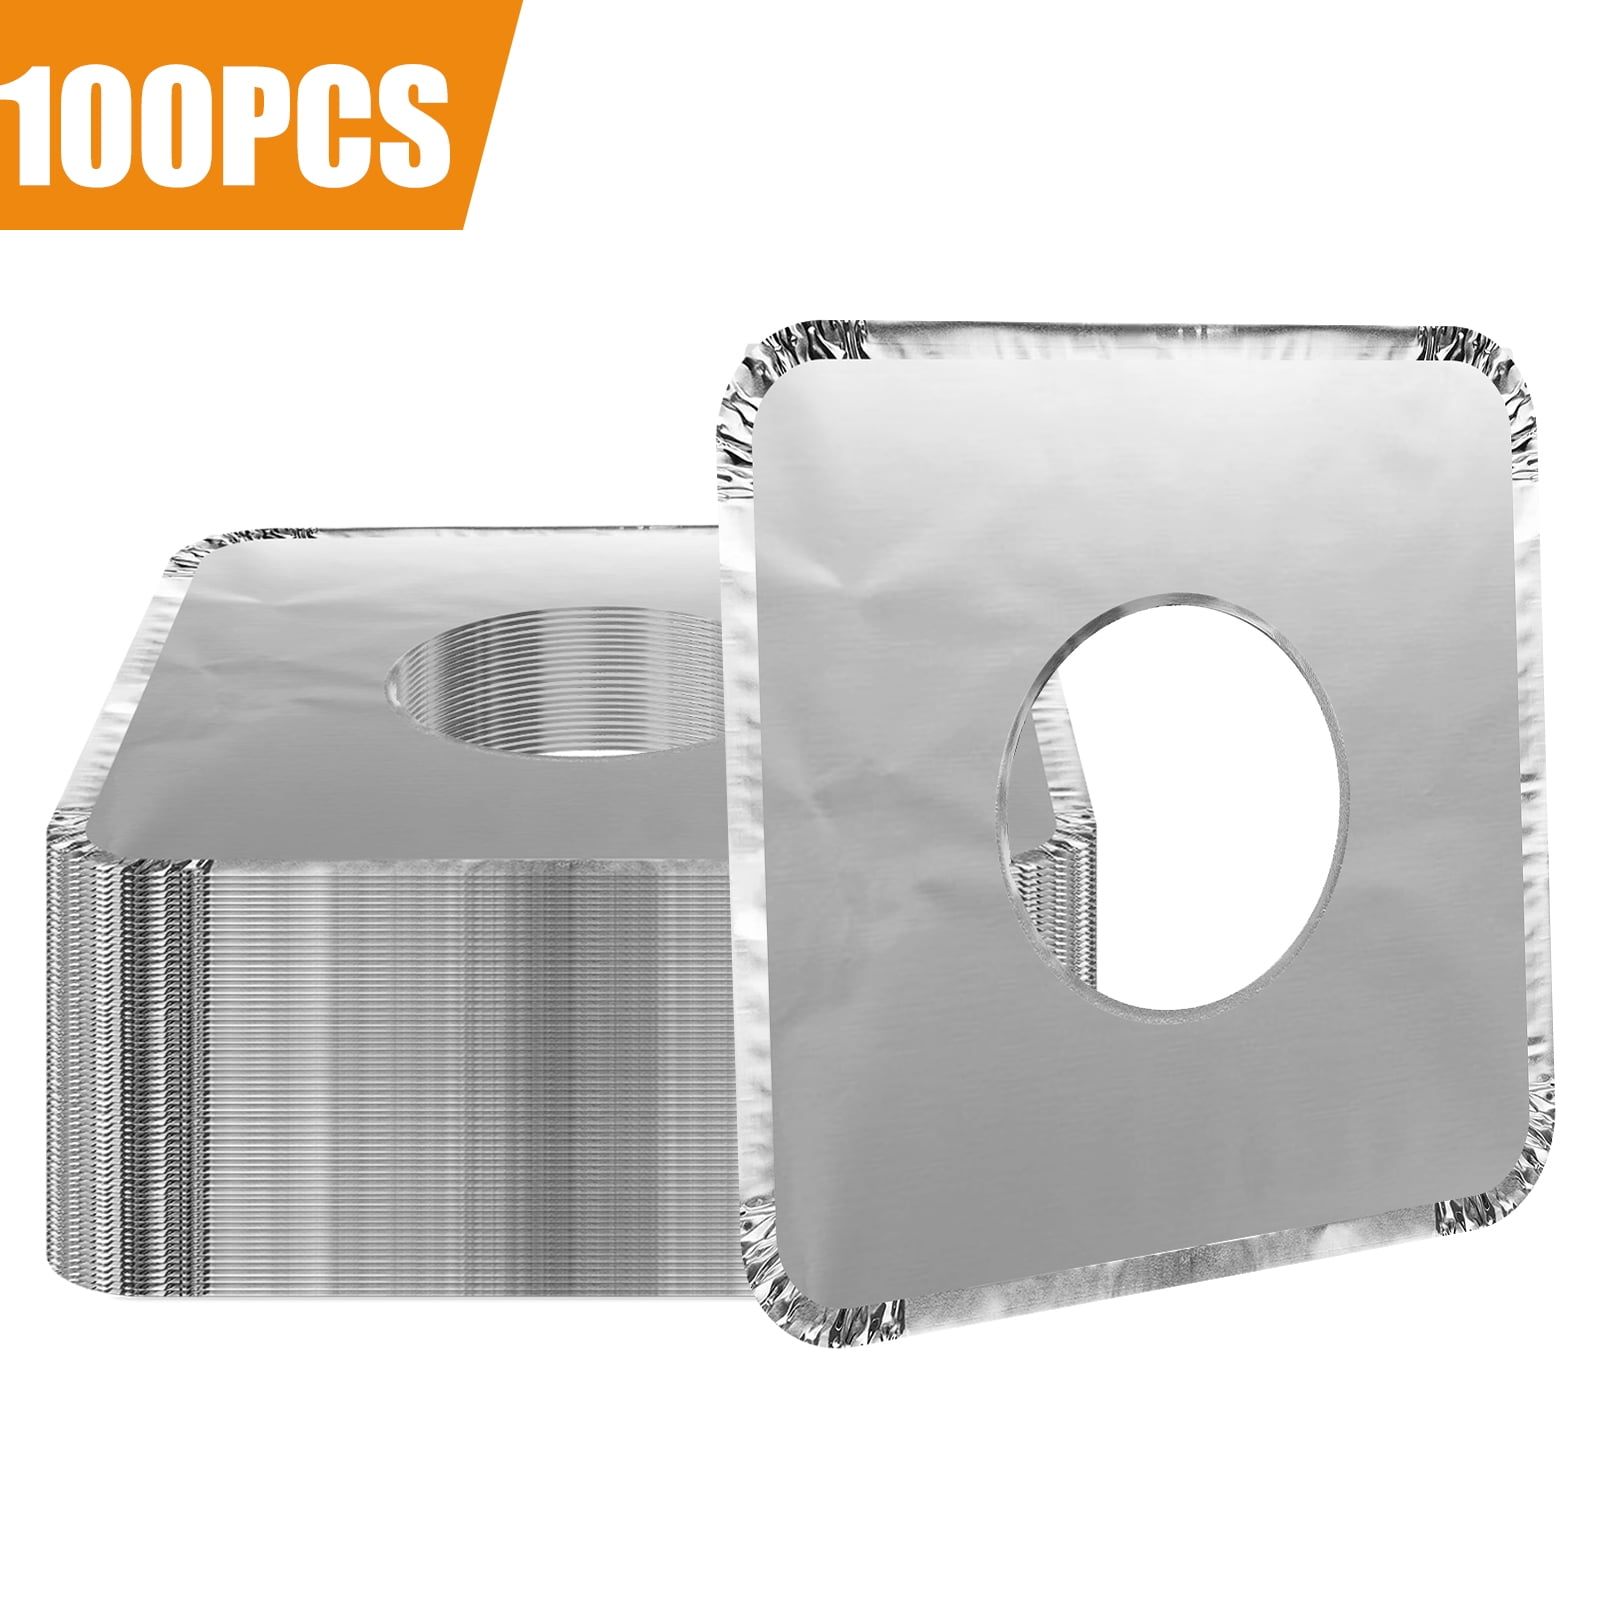 Gas Burner Covers (100 Pack) Disposable Aluminum Foil Square Stove Burner  Liners, 8.5 Inch Gas Range Stove Top Protector